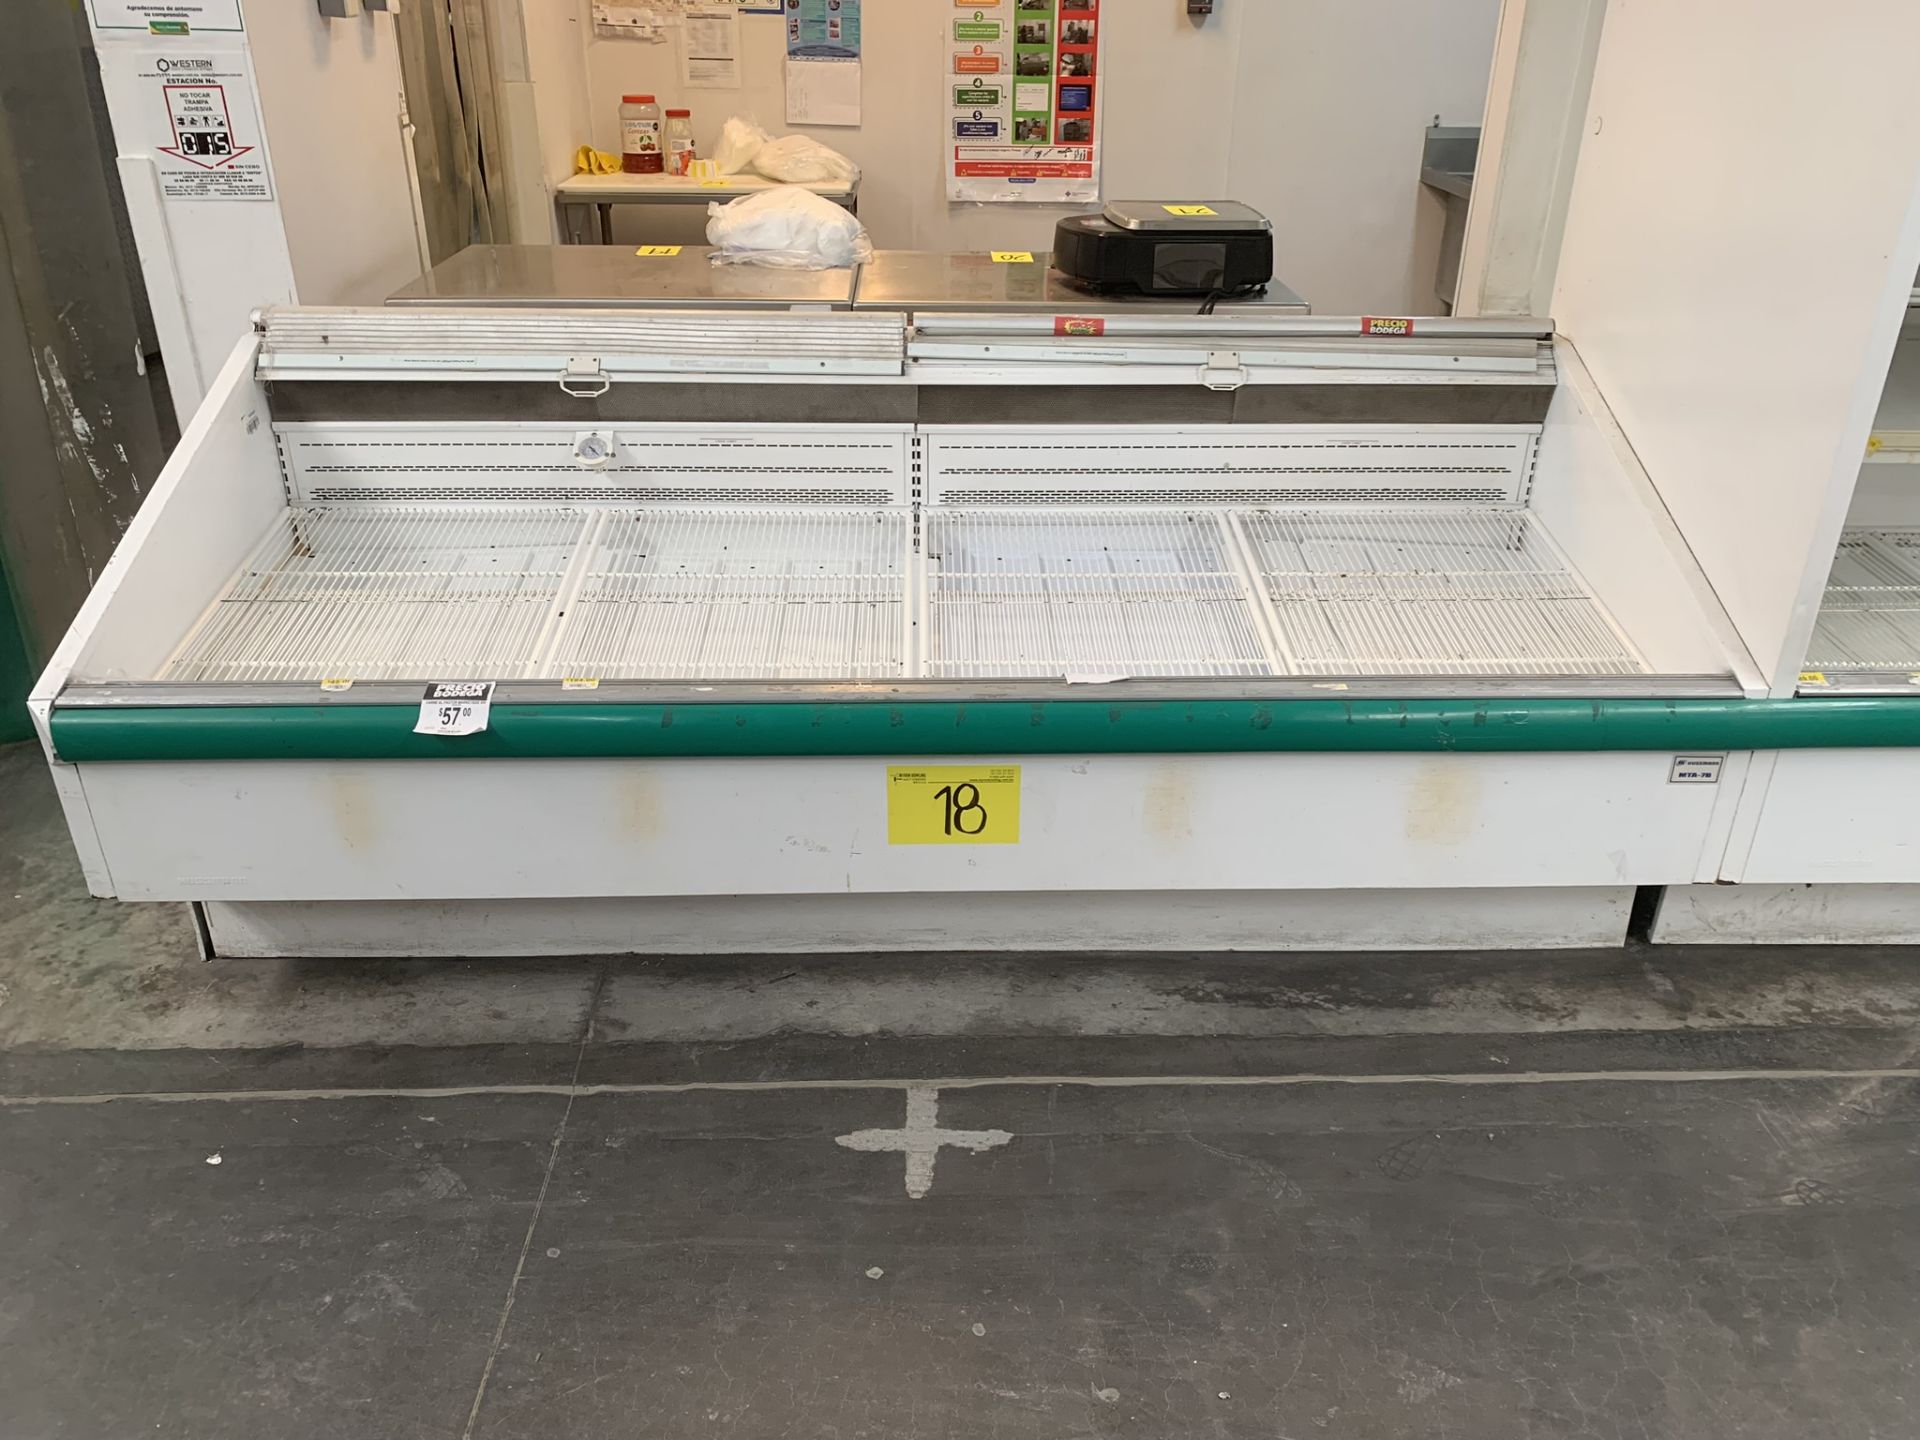 Hussmann bunker-type refrigerated display case for meats measures 2.55 x 1.10 x 0.90 mts - Image 2 of 8